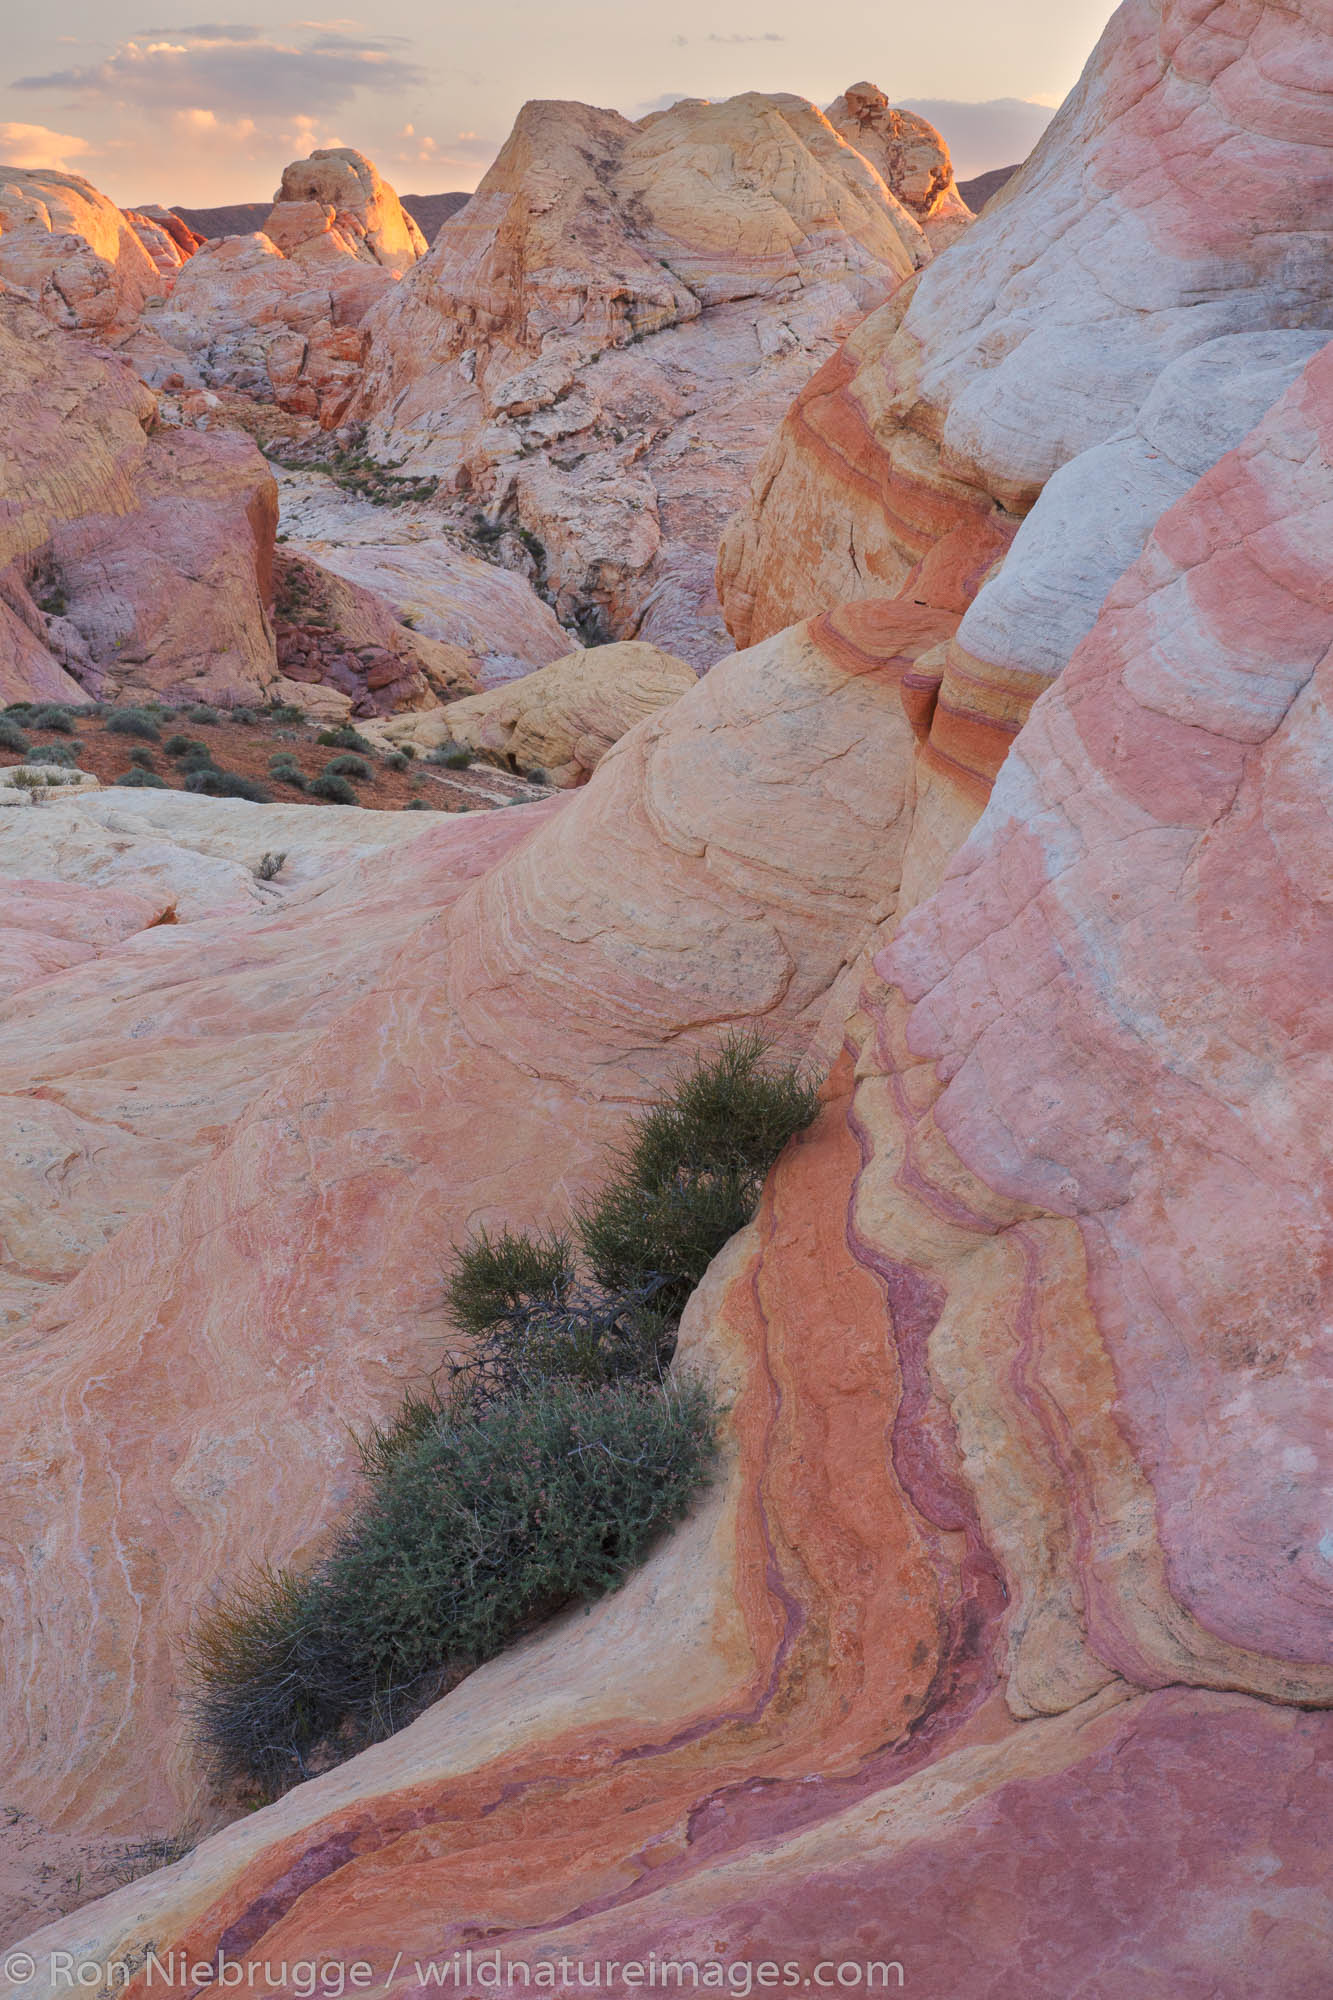 Colorful sandstone in Valley of Fire State Park, near Las Vegas, Nevada.